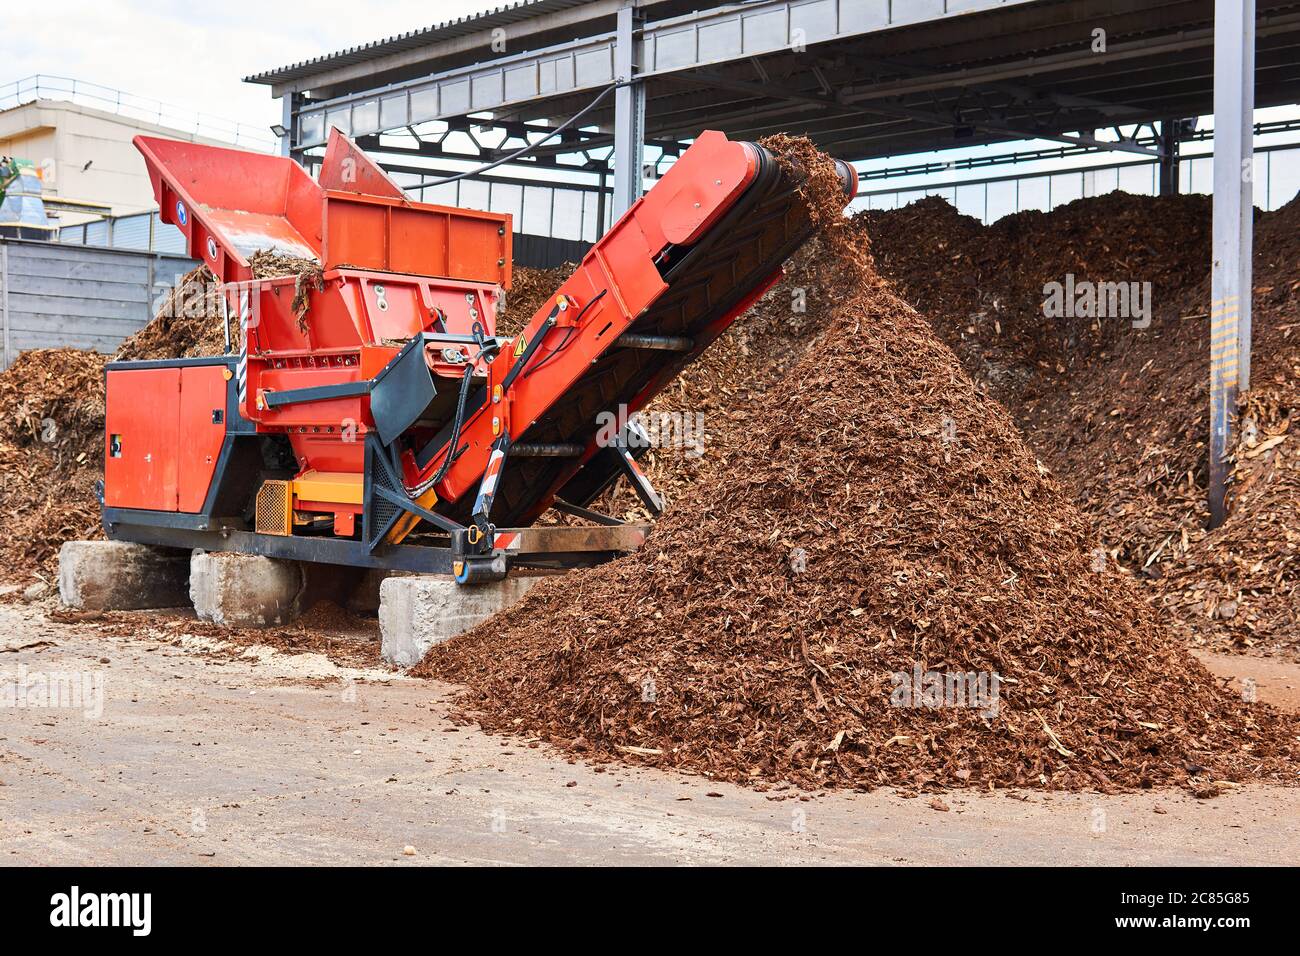 industrial wood shredder producing wood chips from bark Stock Photo